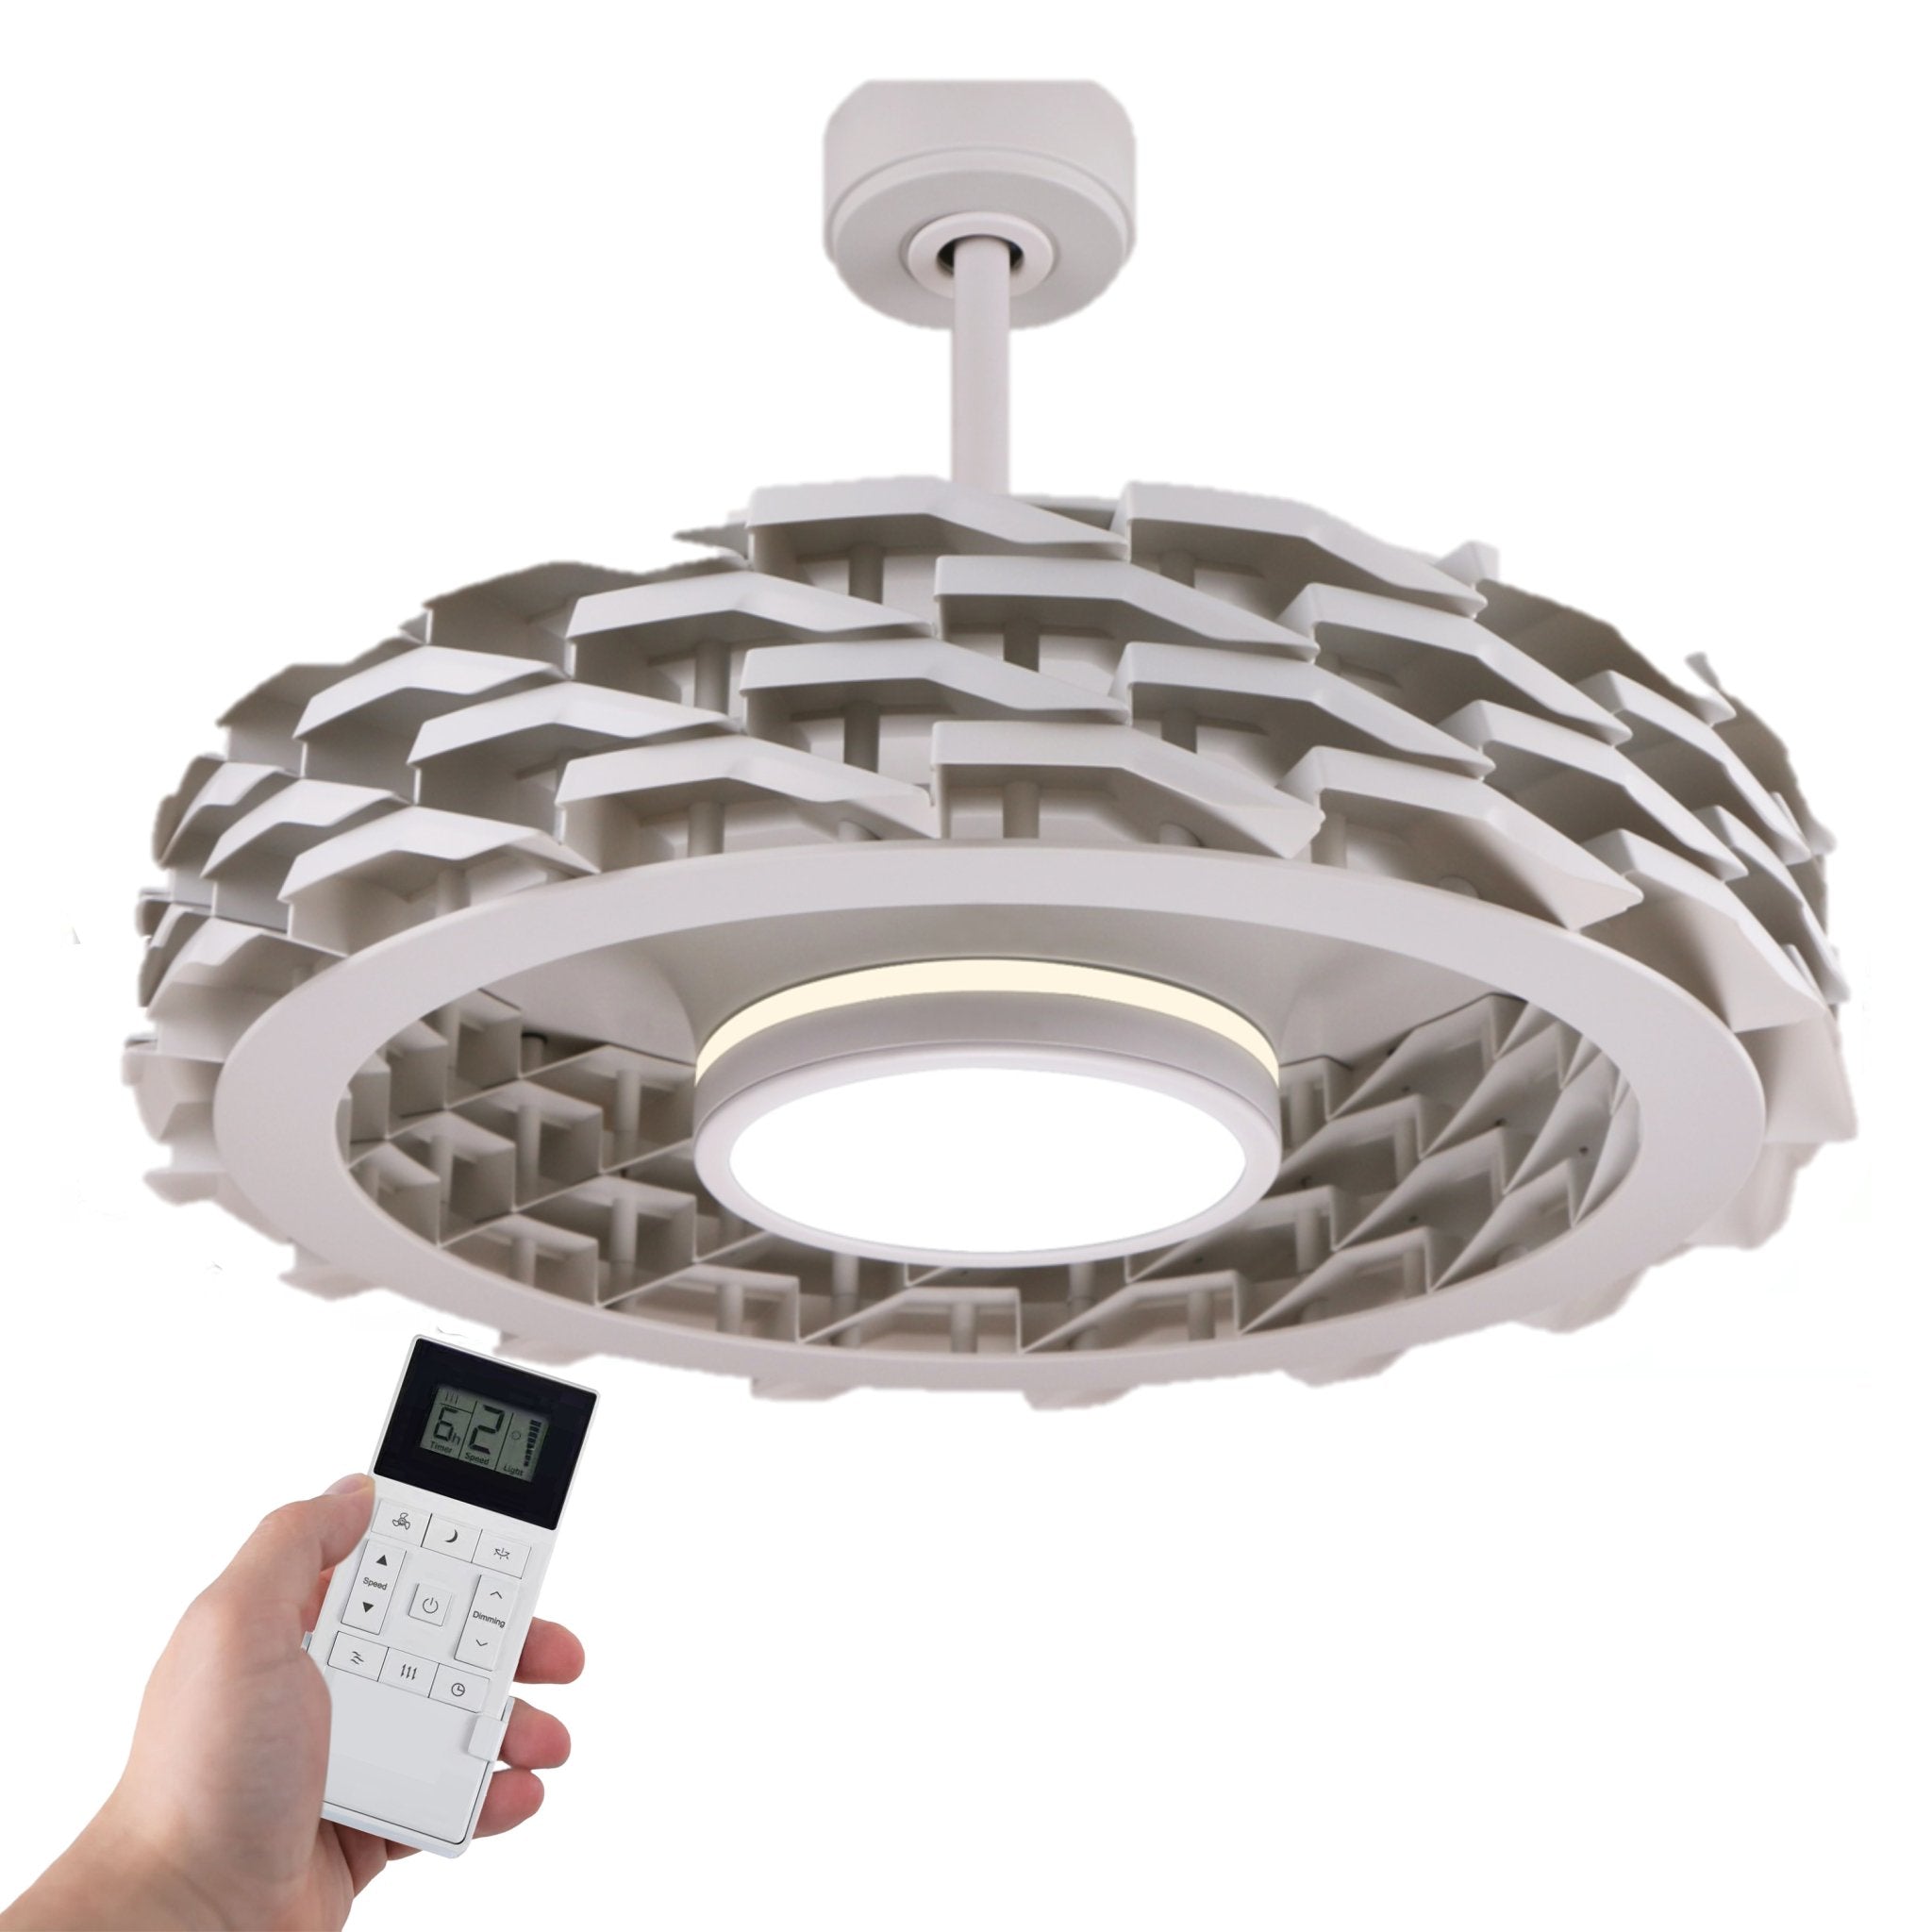 LUMIO Bladeless Ceiling Fan, 6 Speeds with Dimmable LED Light